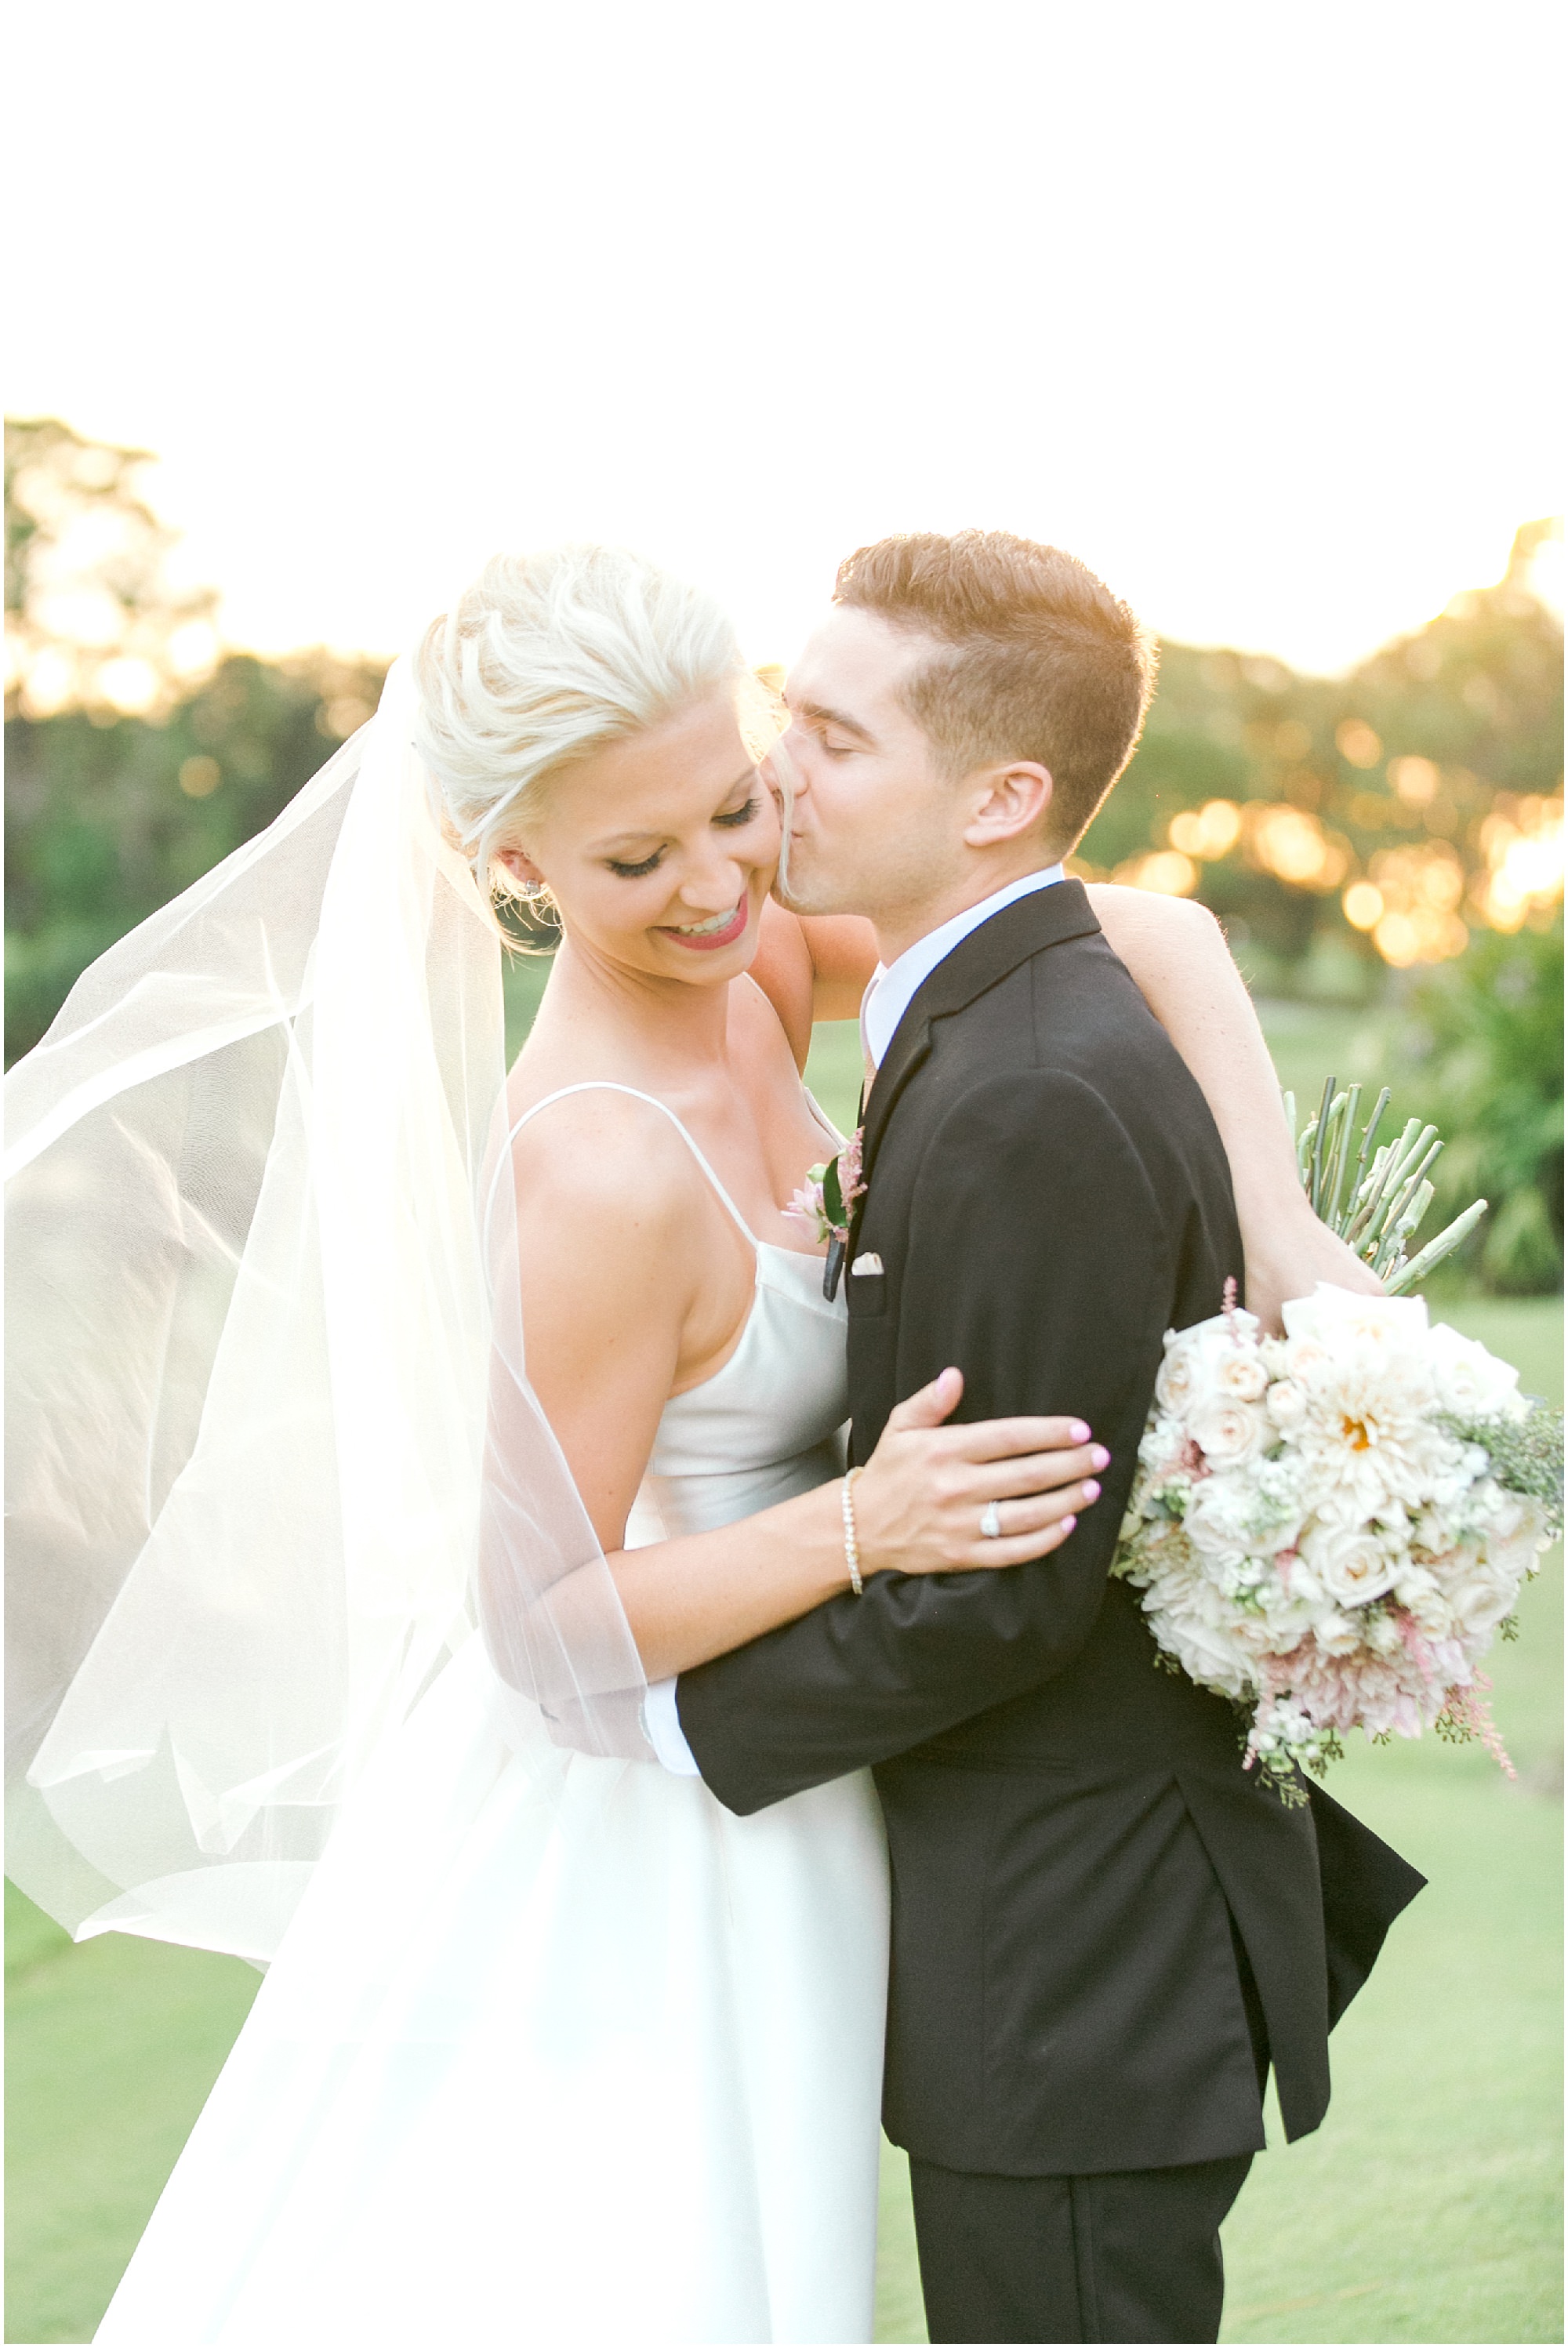 Romantic Wedding at the Villas of Grand Cypress bride and groom taking portraits in the sunset.